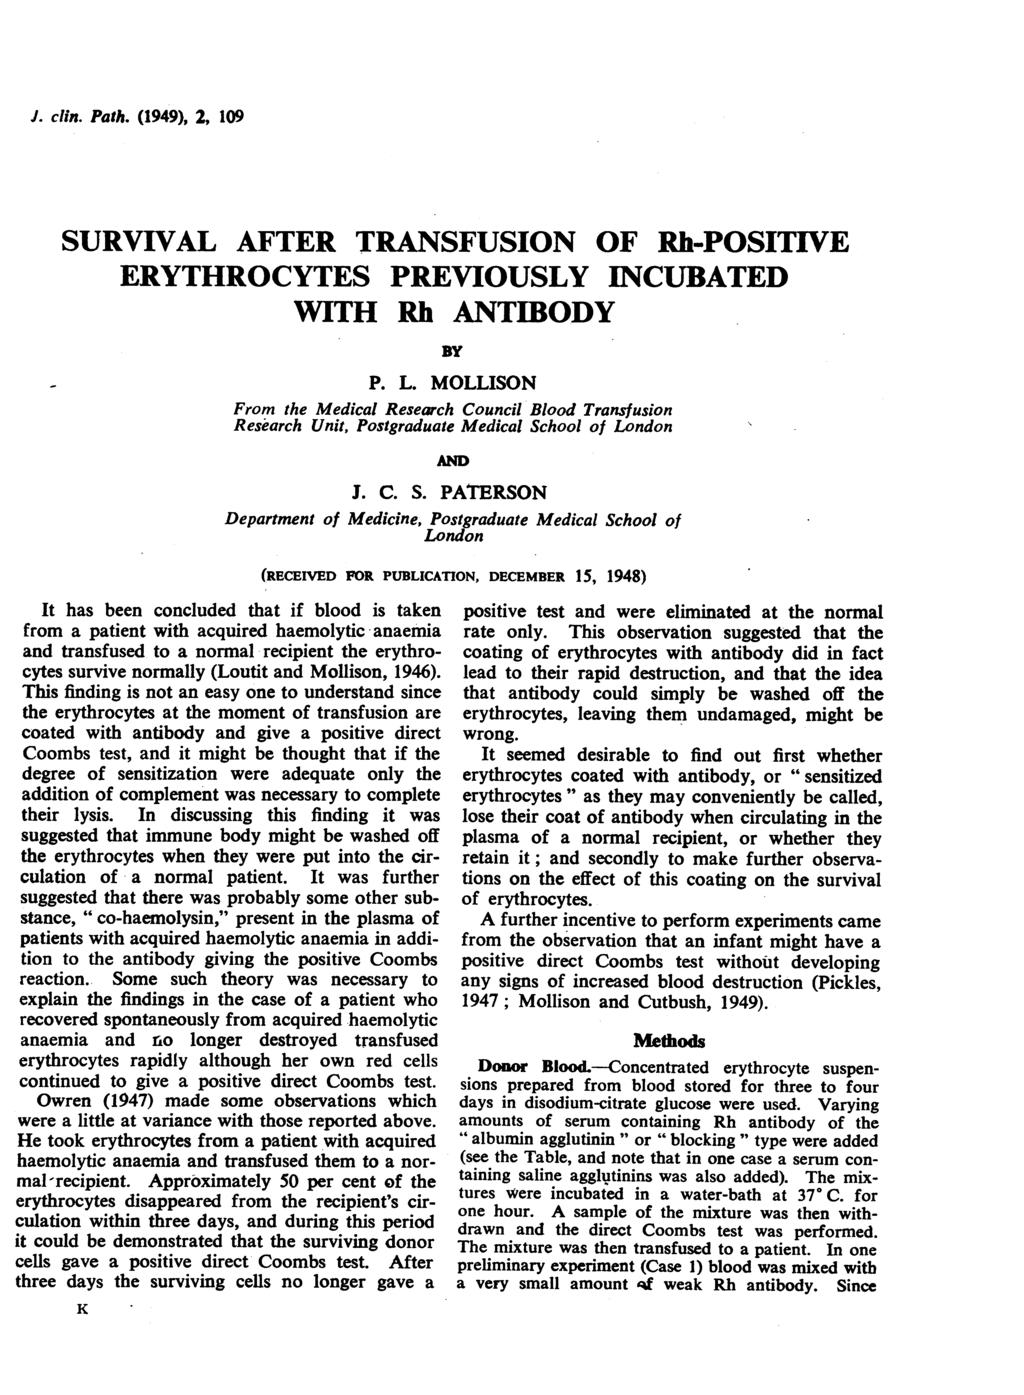 J. clin. Path. (1949), 2, 109 SURVIVAL AFTER TRANSFUSION OF Rh-POSITIVE ERYTHROCYTES PREVIOUSLY INCUBATED WITH Rh ANTIBODY BY P. L.